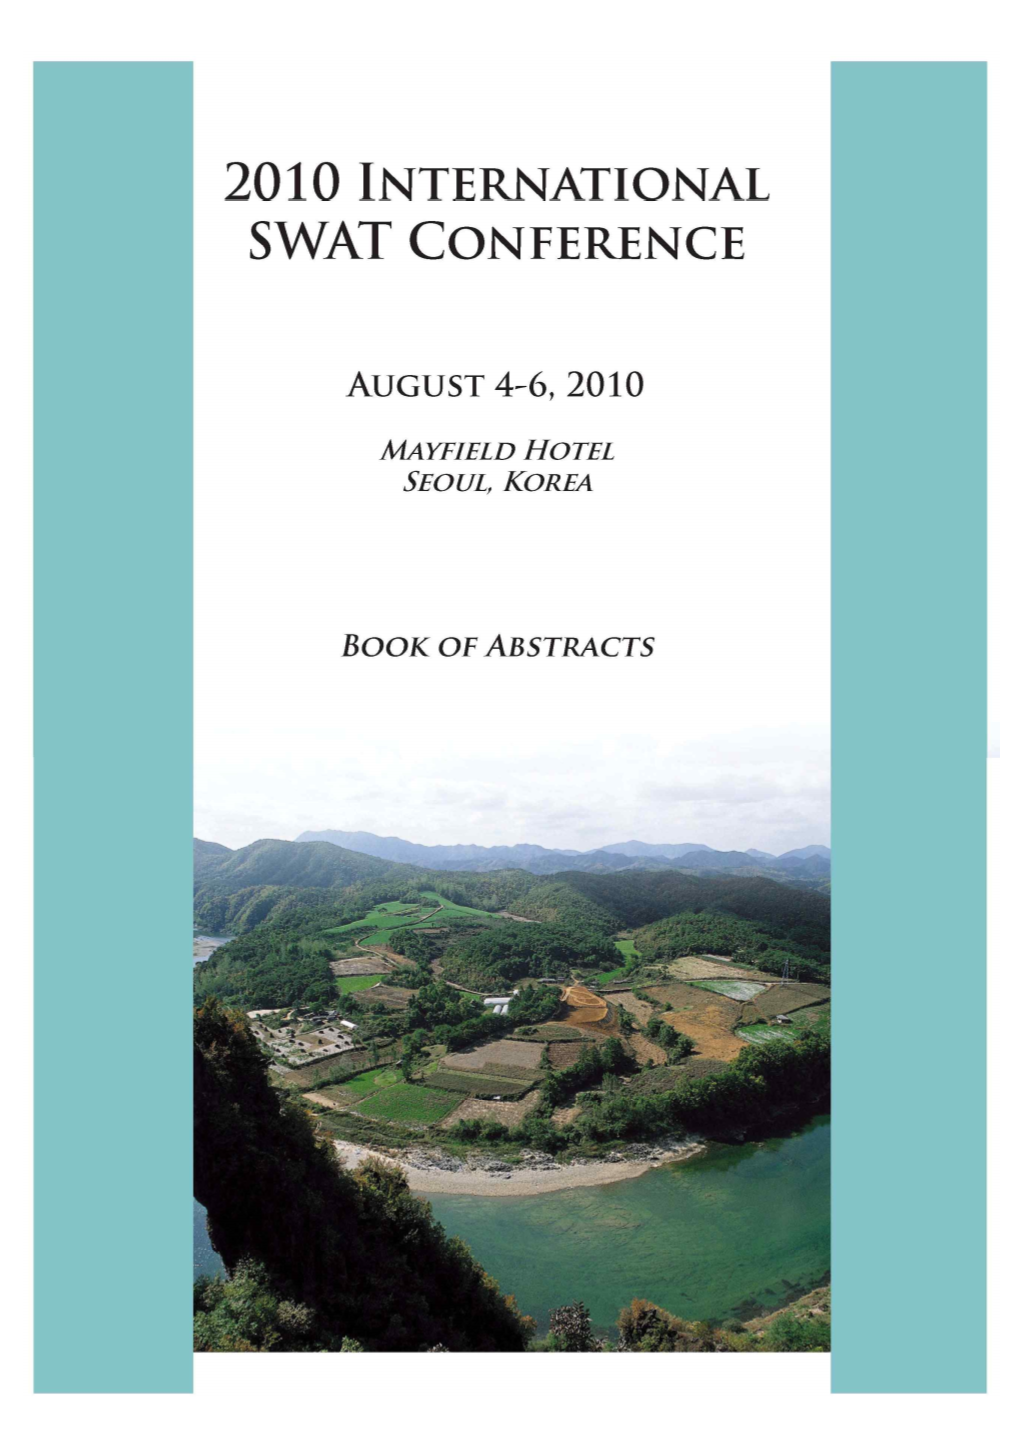 2010 International SWAT Conference Book of Abstracts